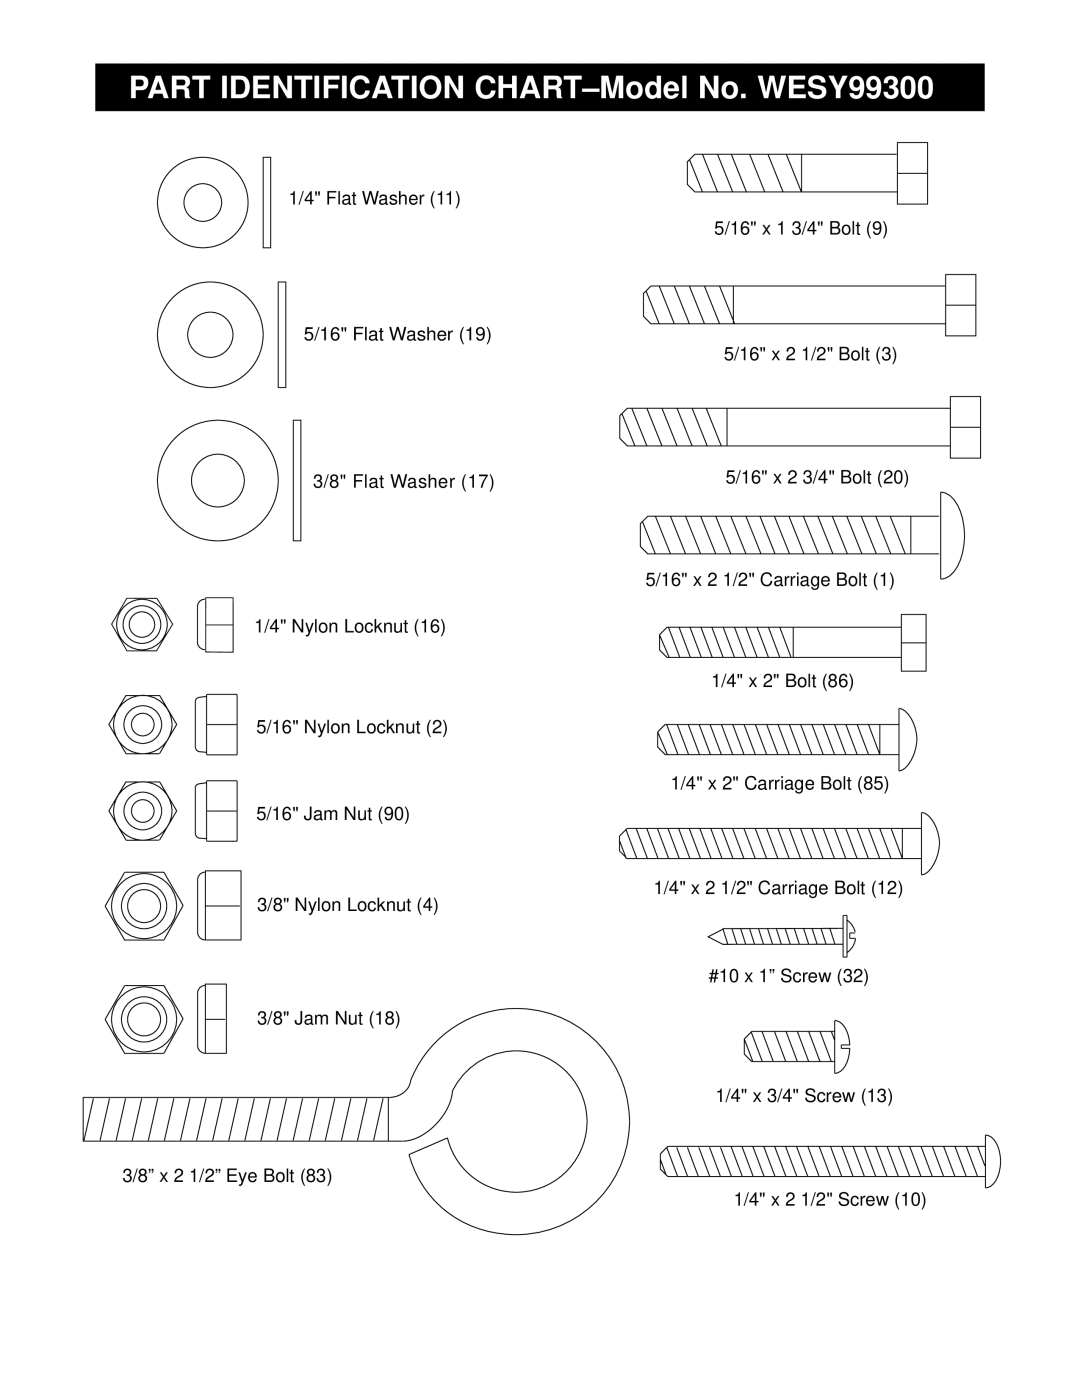 Weider PART IDENTIFICATION CHART-Model No. WESY99300, 5/16 Nylon Locknut 5/16 Jam Nut 3/8 Nylon Locknut 3/8 Jam Nut 